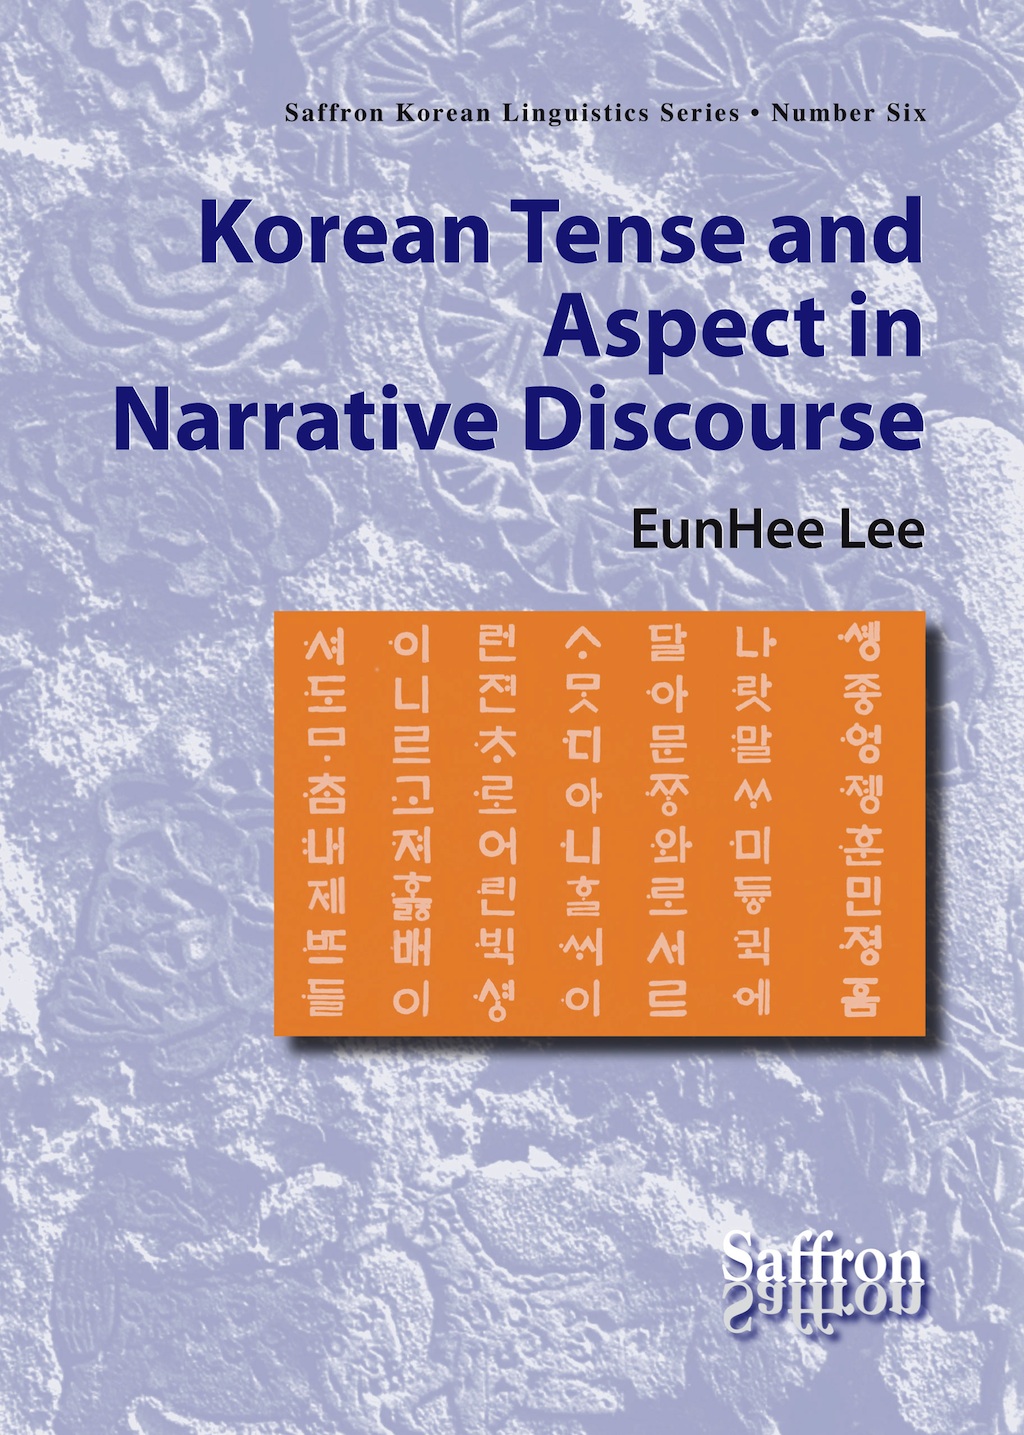 Korean Tense and Aspect in Narrative Discourse Product no.: 9781872843438/1740-2956